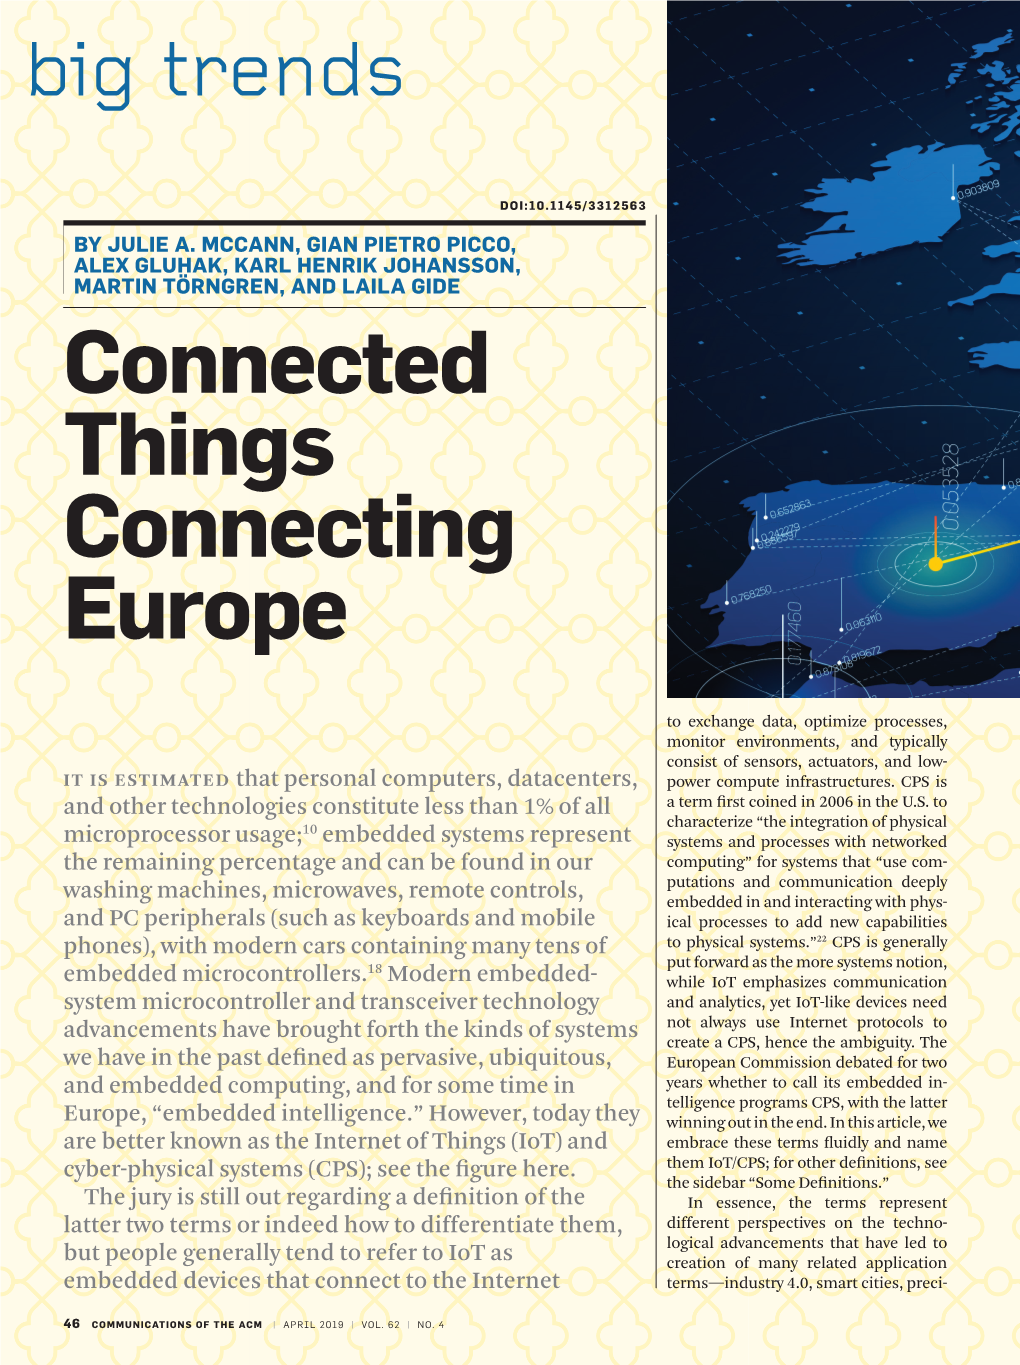 Connected Things Connecting Europe